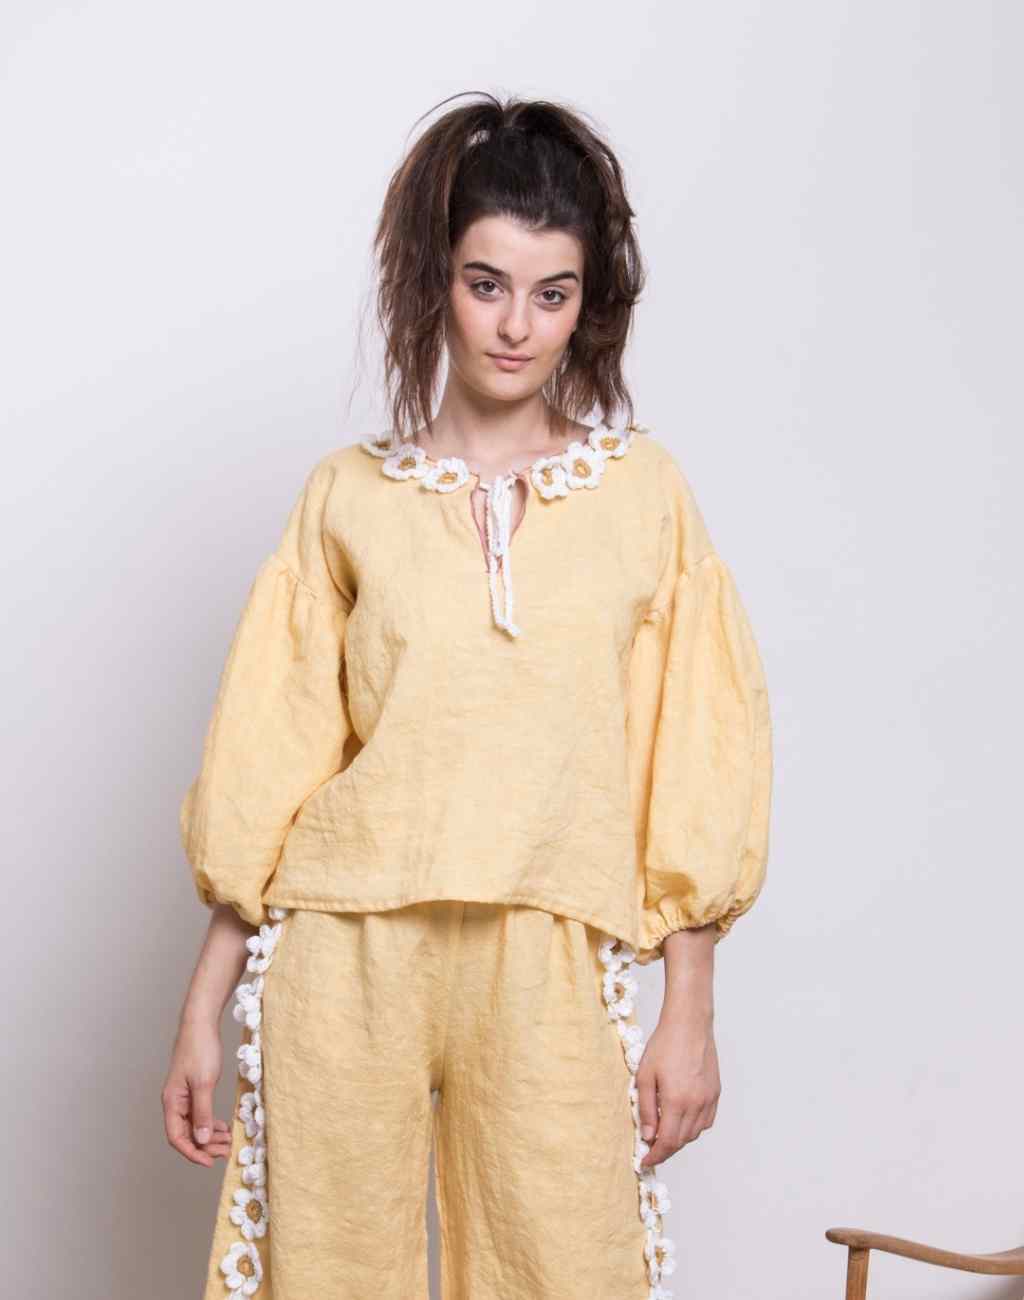 Yellow loulou Linen Blouse with Crocheted Daisies and Tie | Balloon Sleeves - Visit Nifty Nina Leuca 